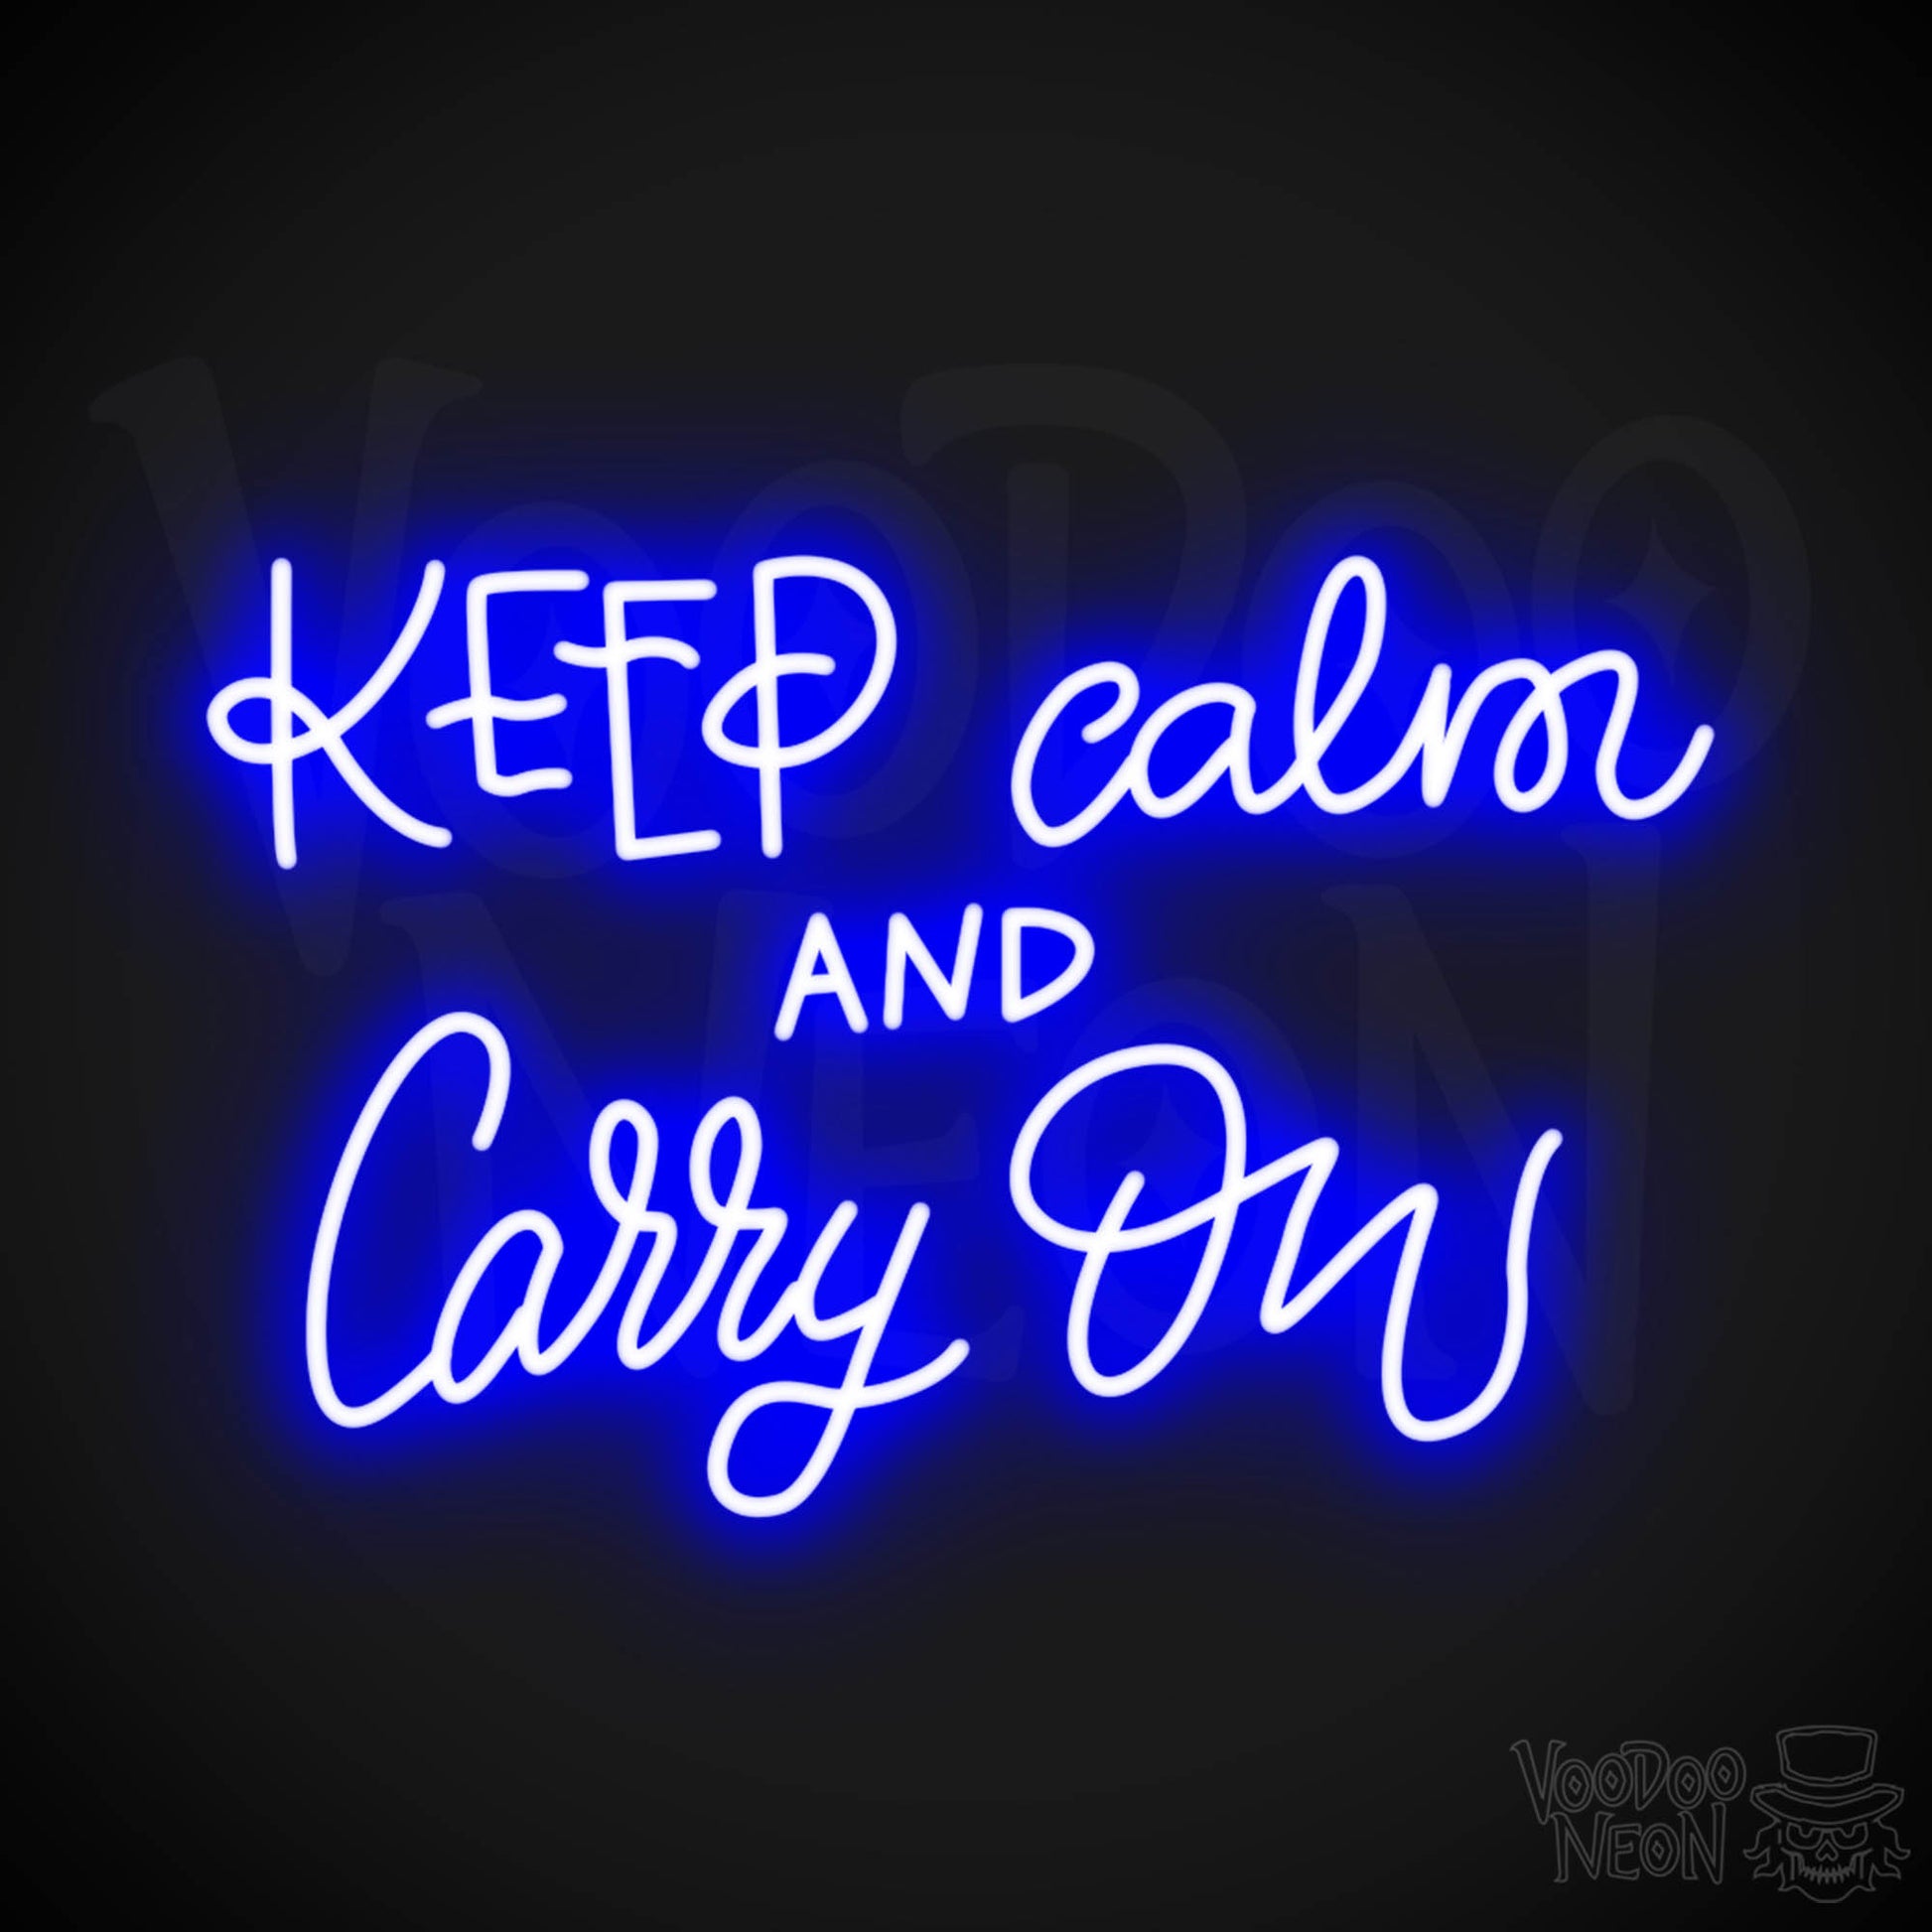 Keep Calm And Carry On Sign - Neon Sign - LED Wall Art - Color Dark Blue